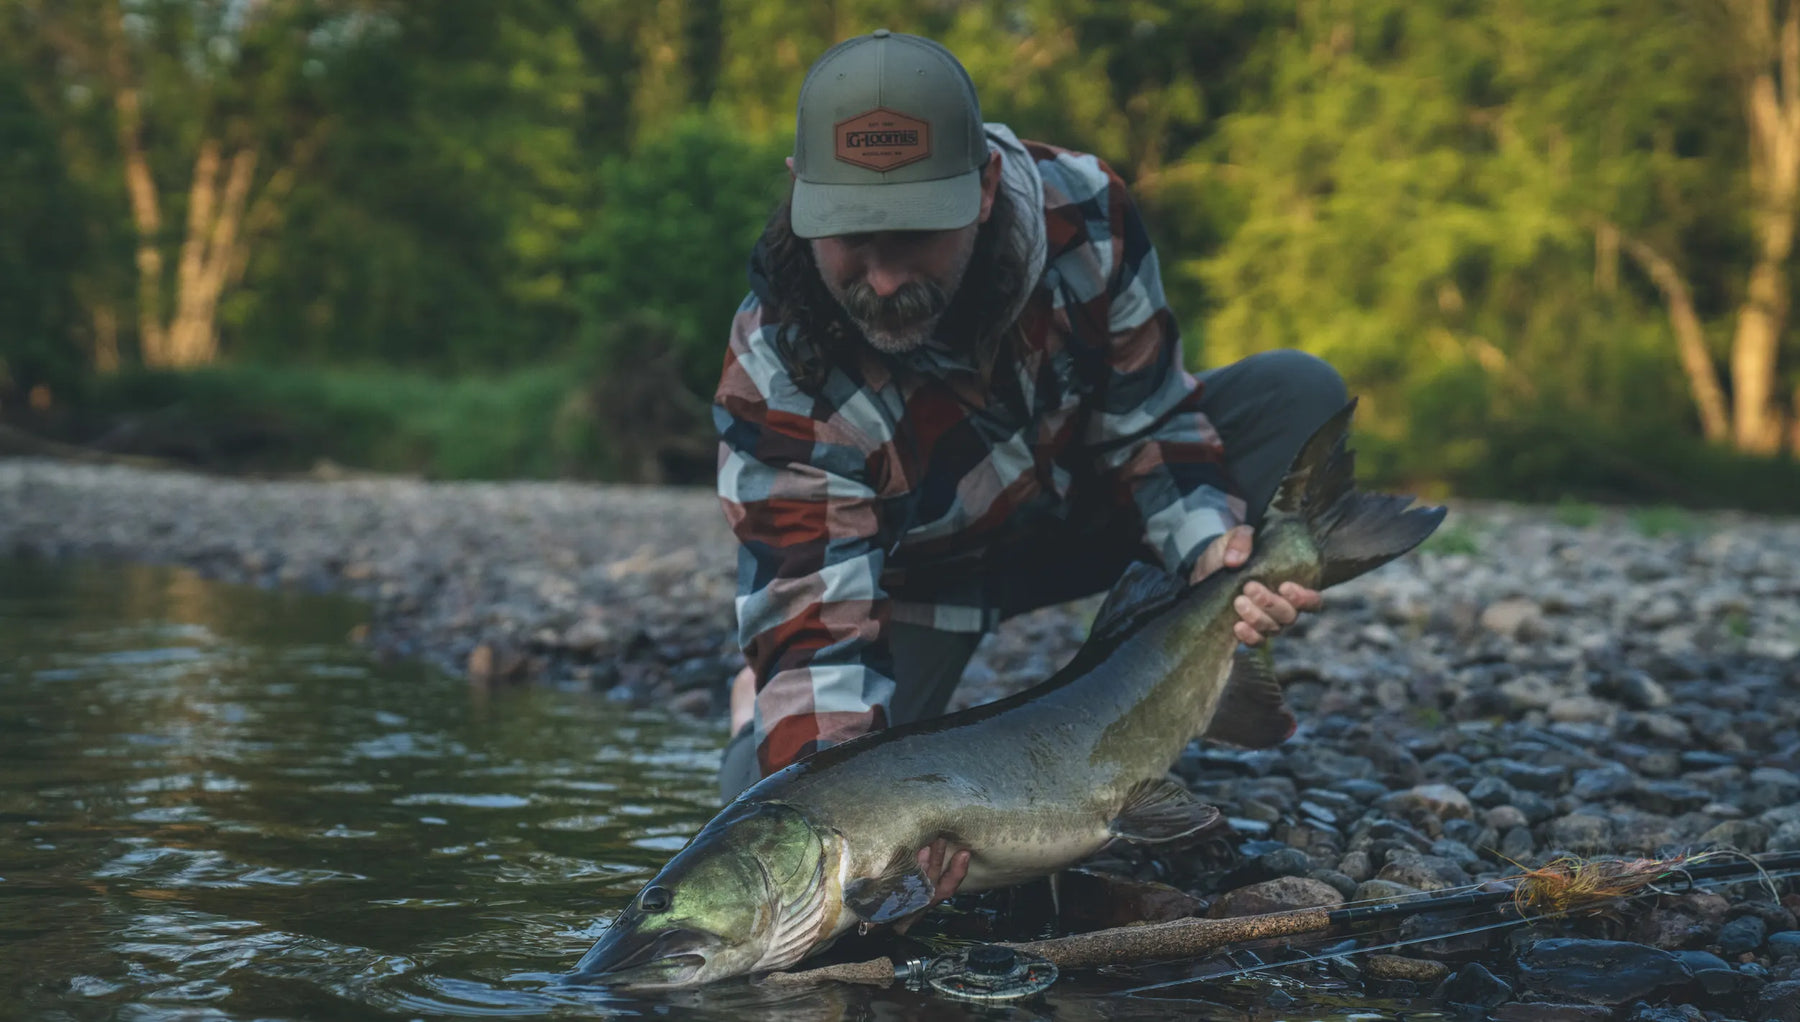 G.Loomis Canada  Handcrafted Conventional and Fly Fishing Rods – G. Loomis  Canada